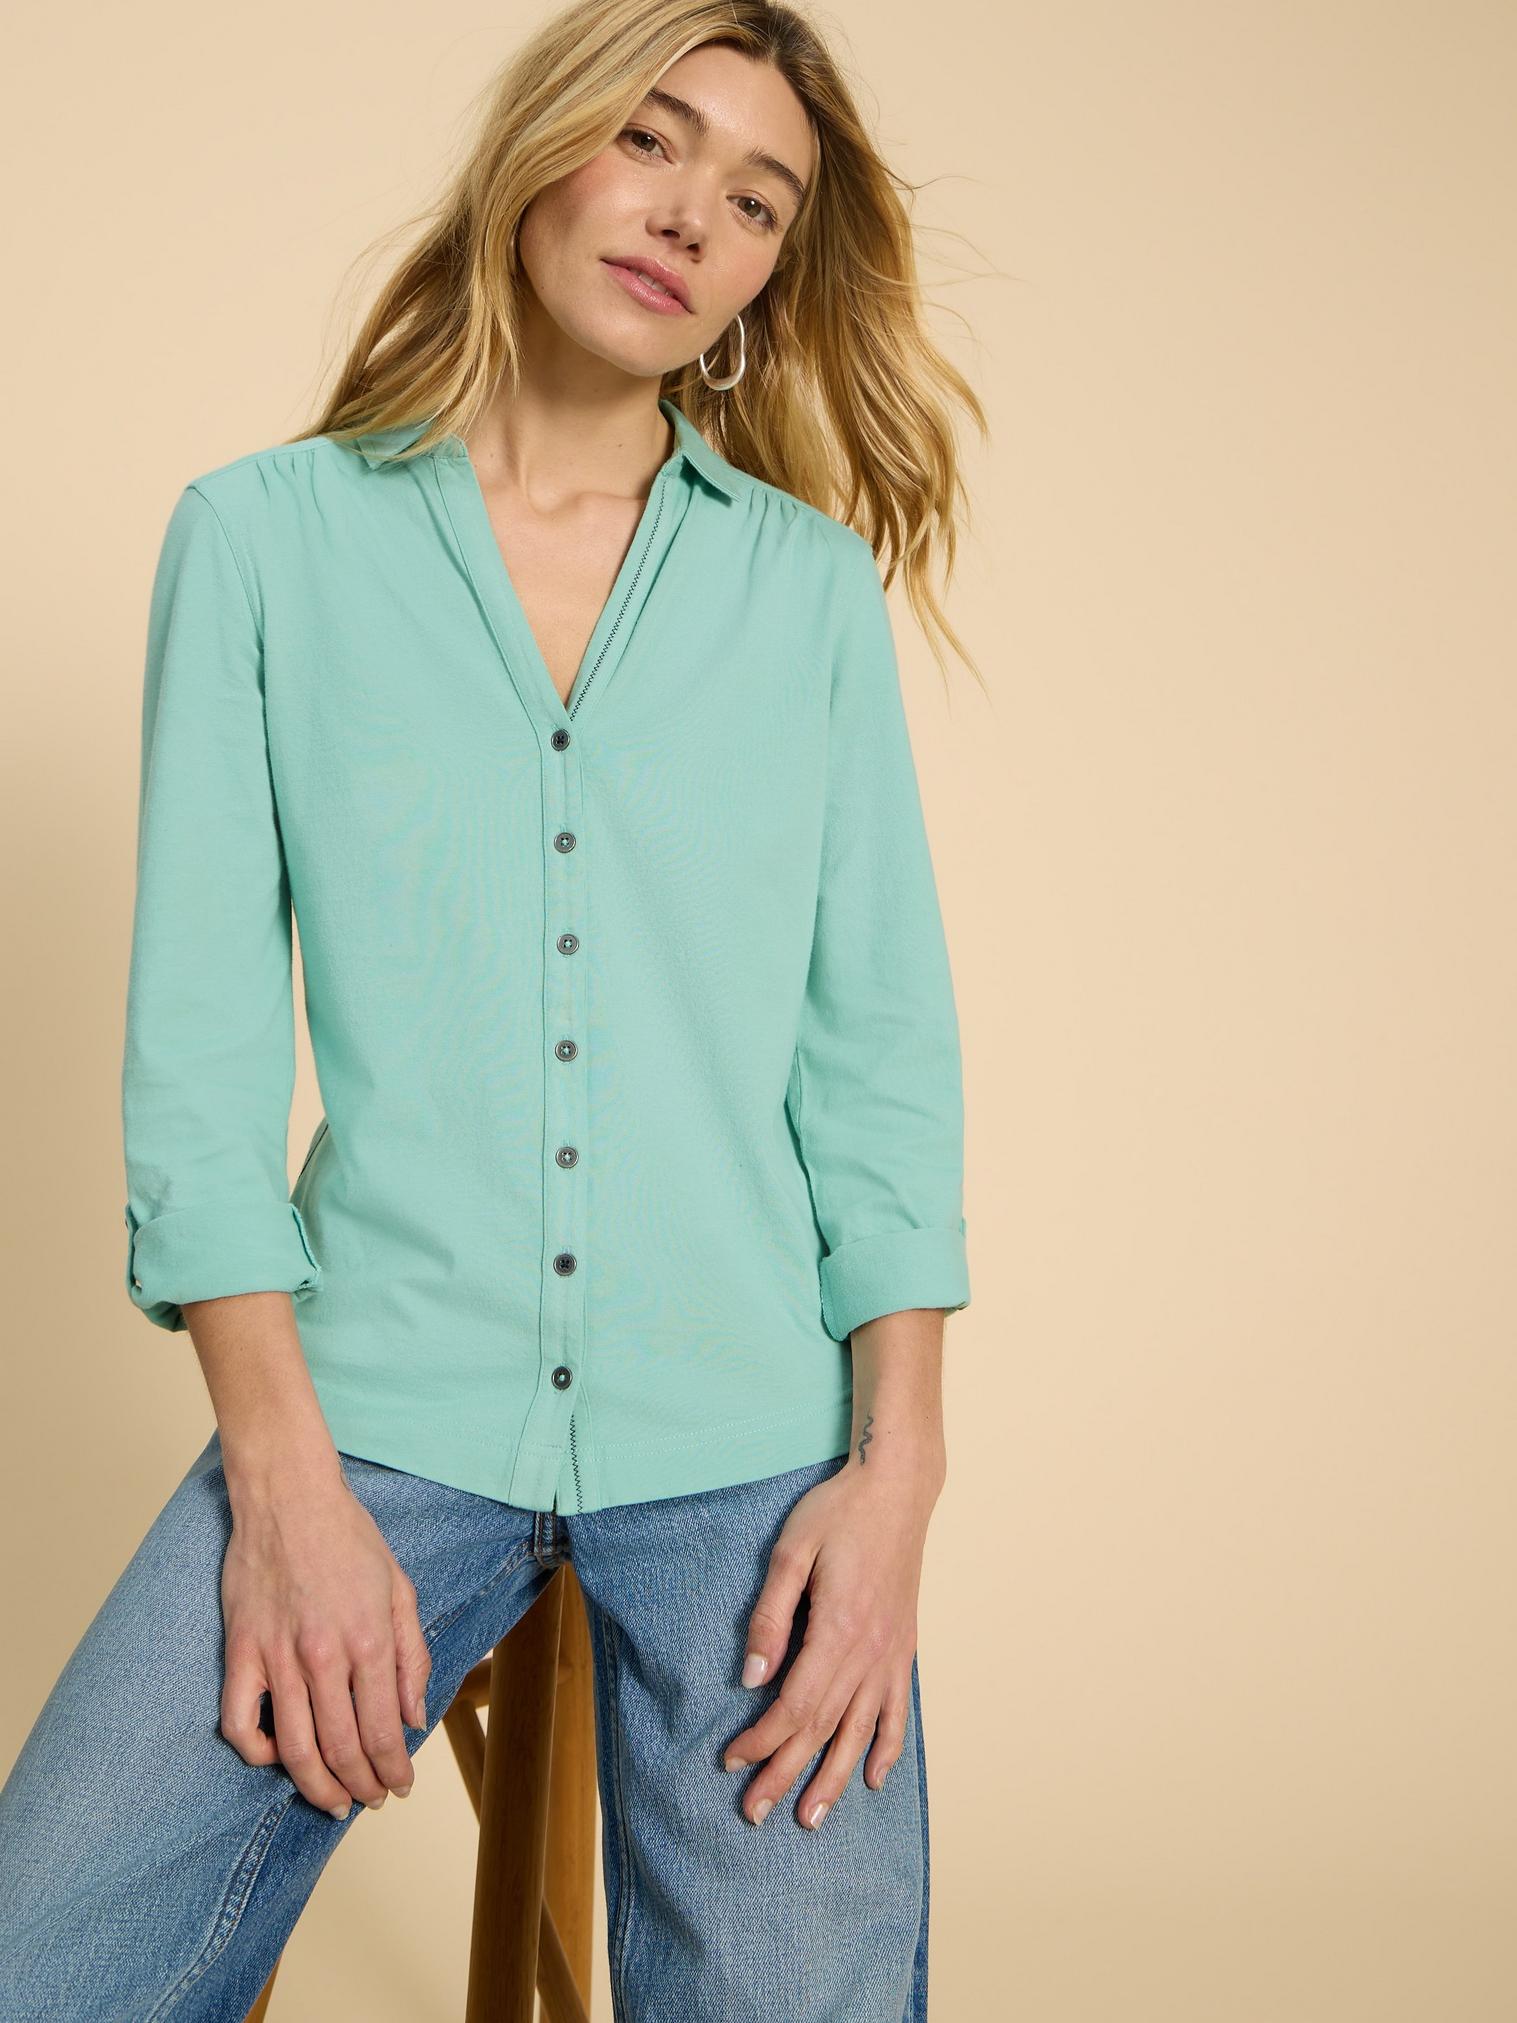 ANNIE JERSEY PRINT SHIRT in MID TEAL - LIFESTYLE